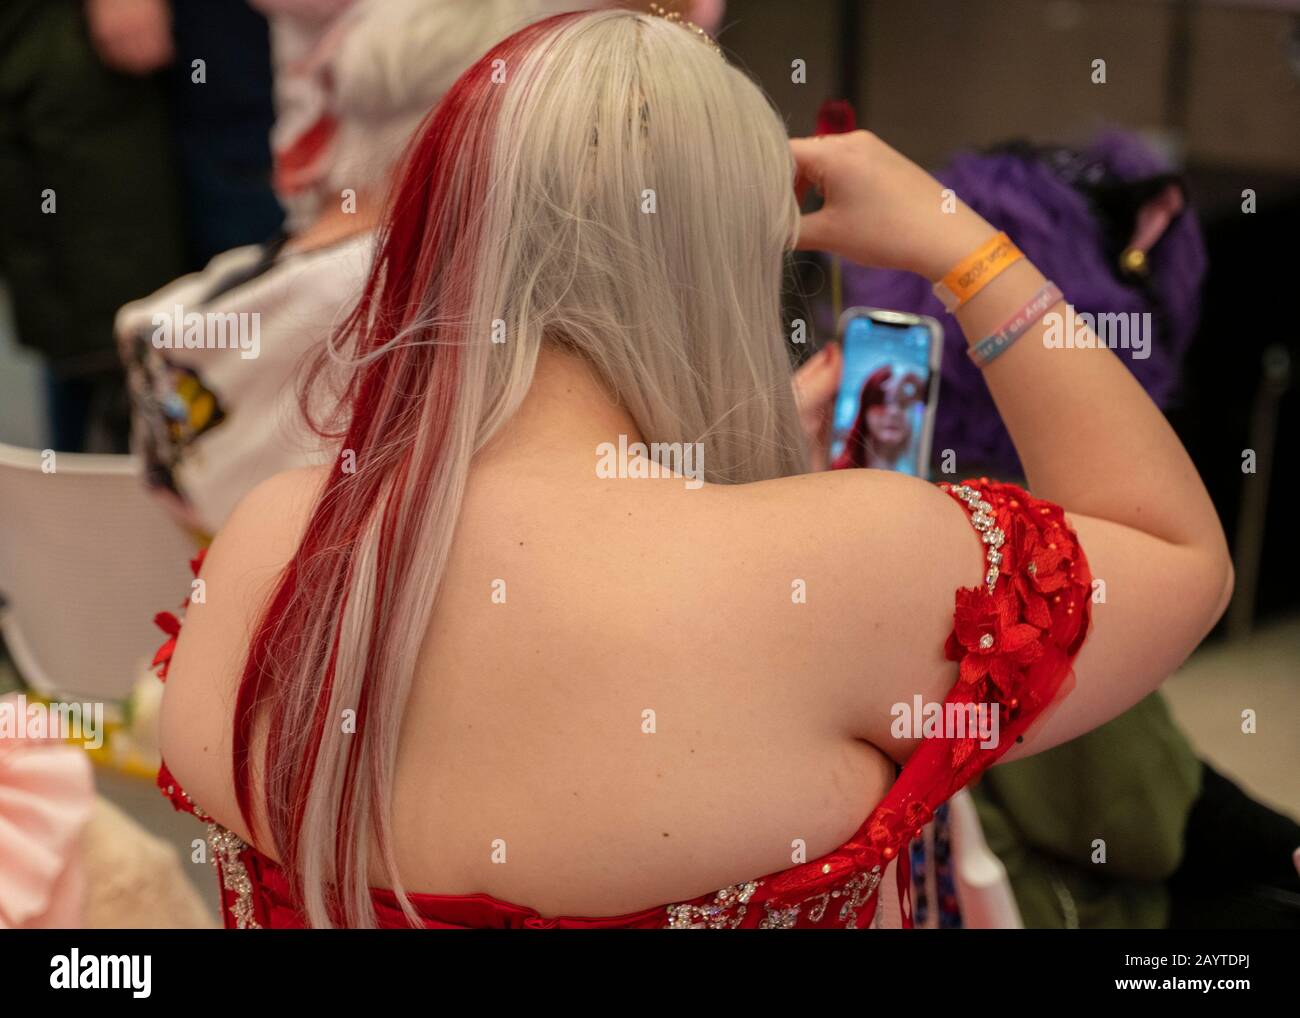 London Anime And Gaming Convention Stock Photo